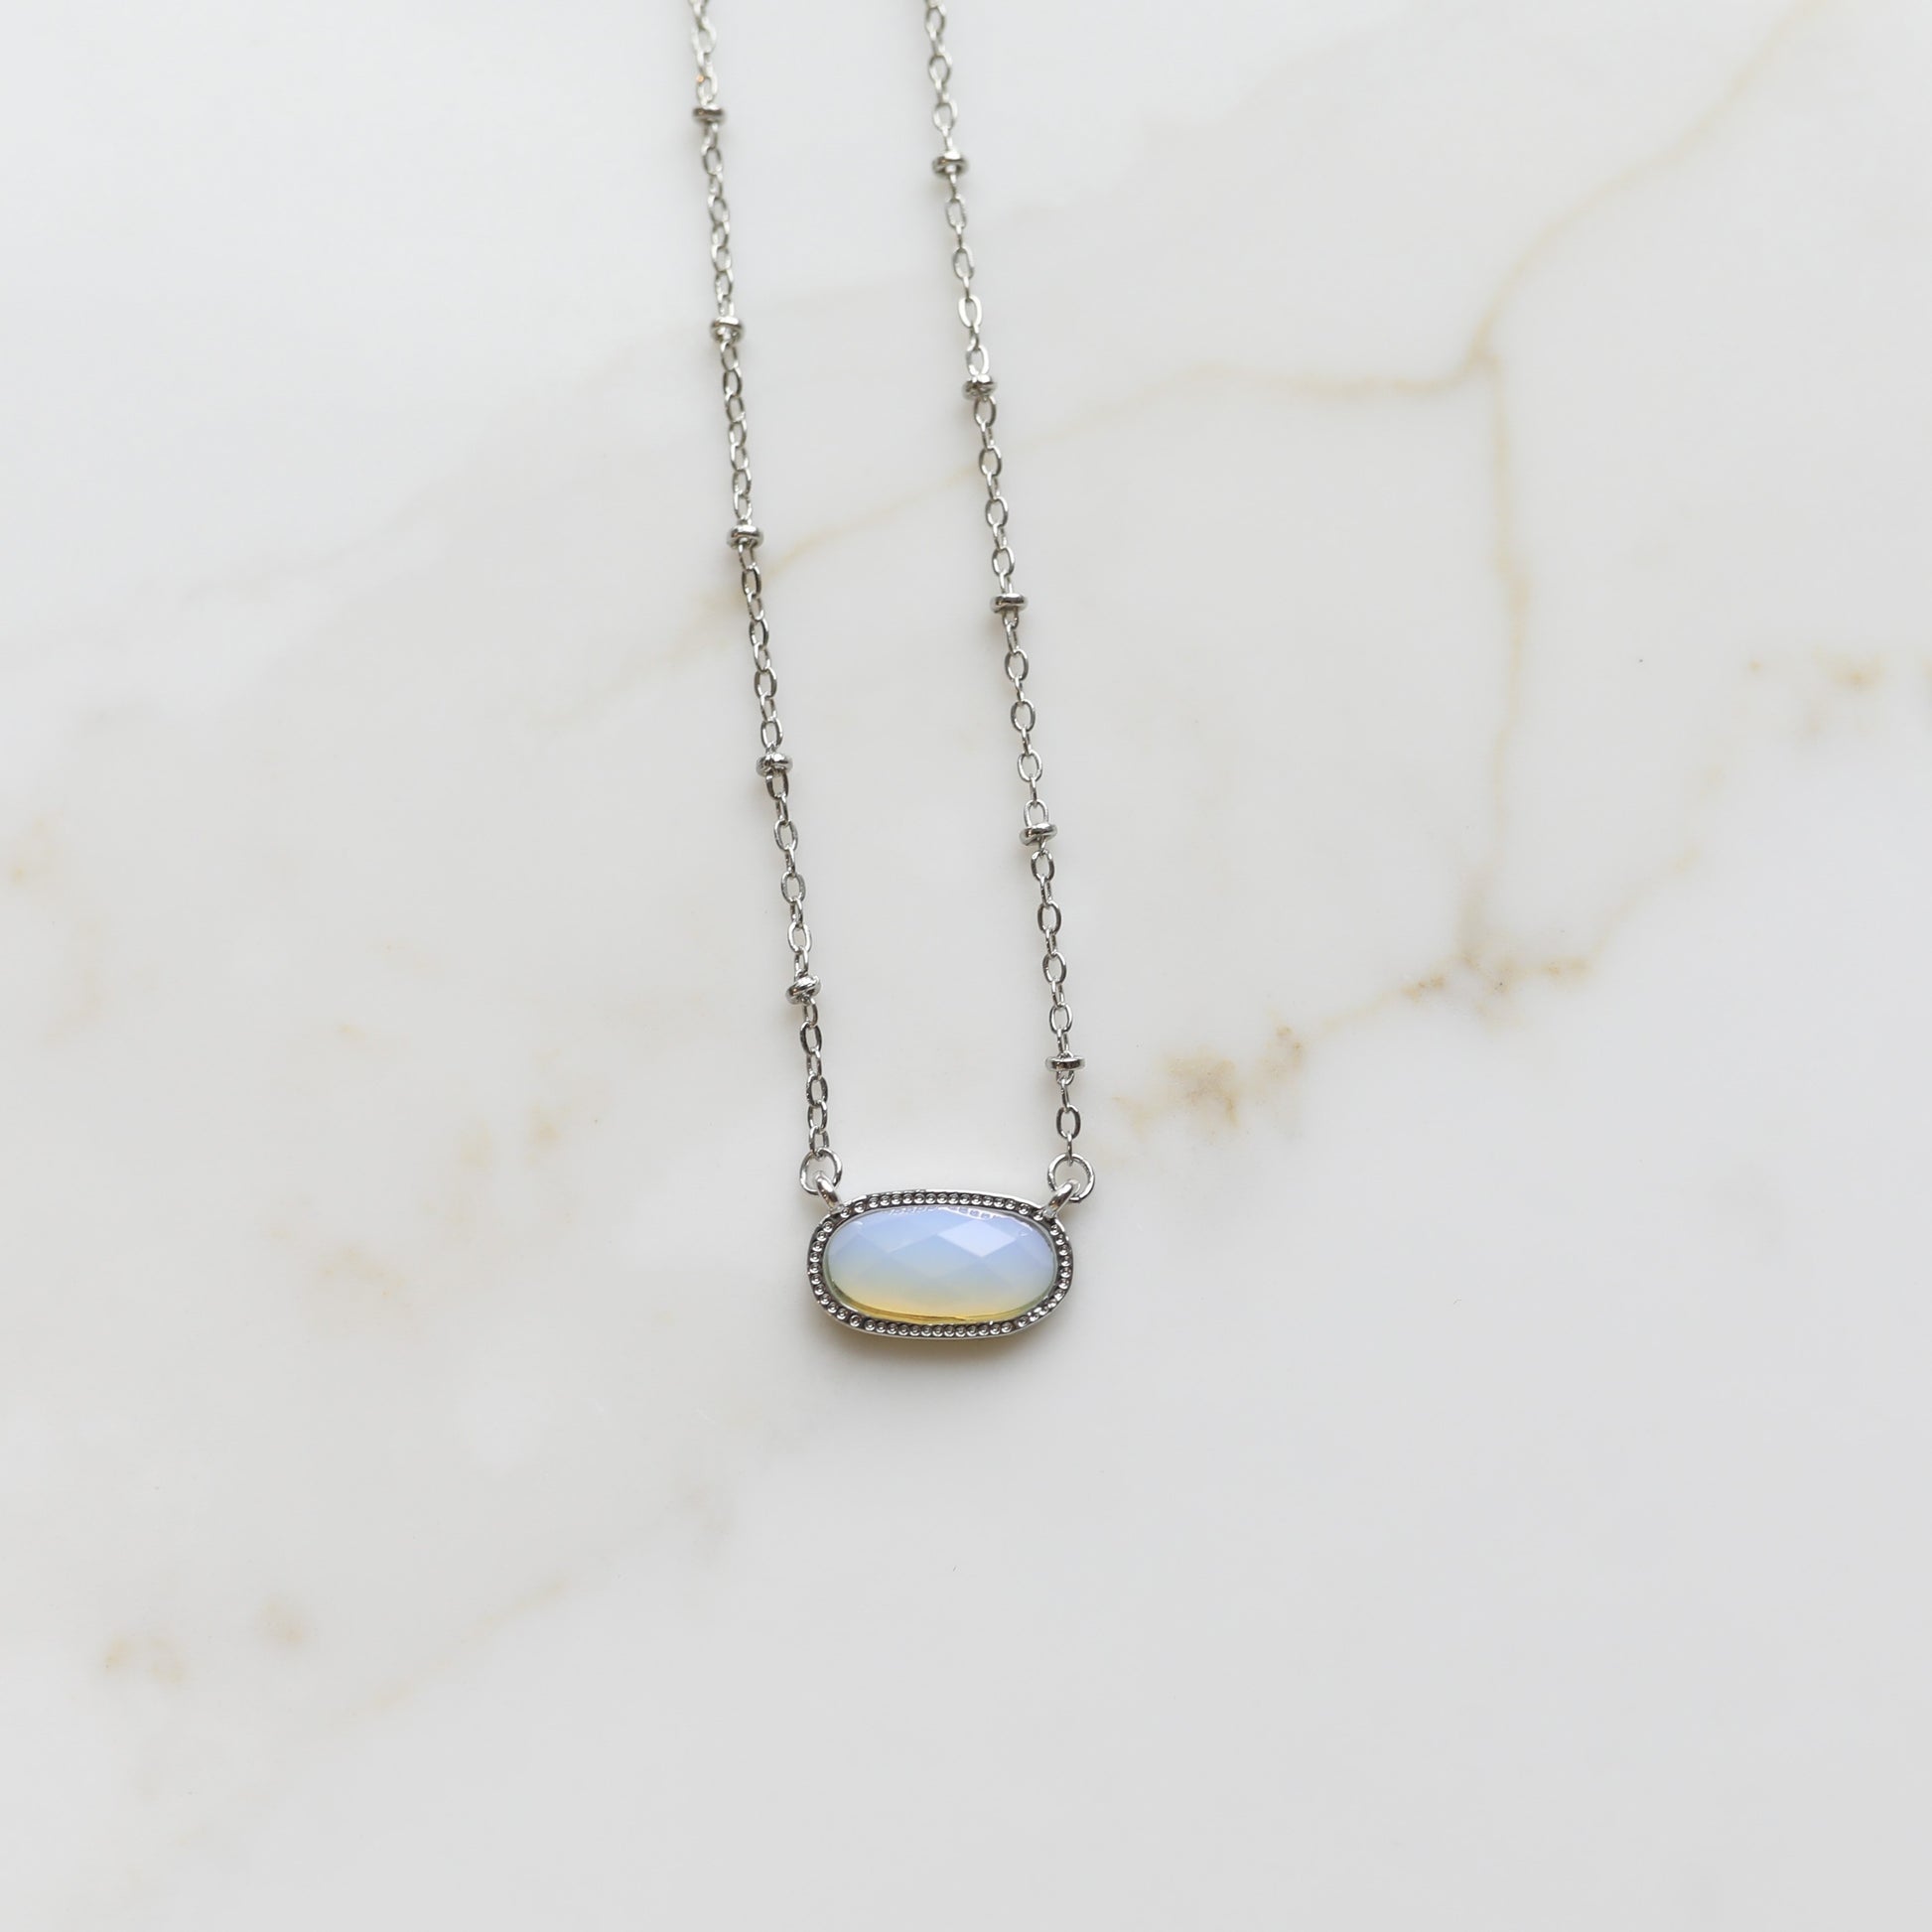 Meaningful Gemstone Necklace in Opalite available with a Gold or Silver chain